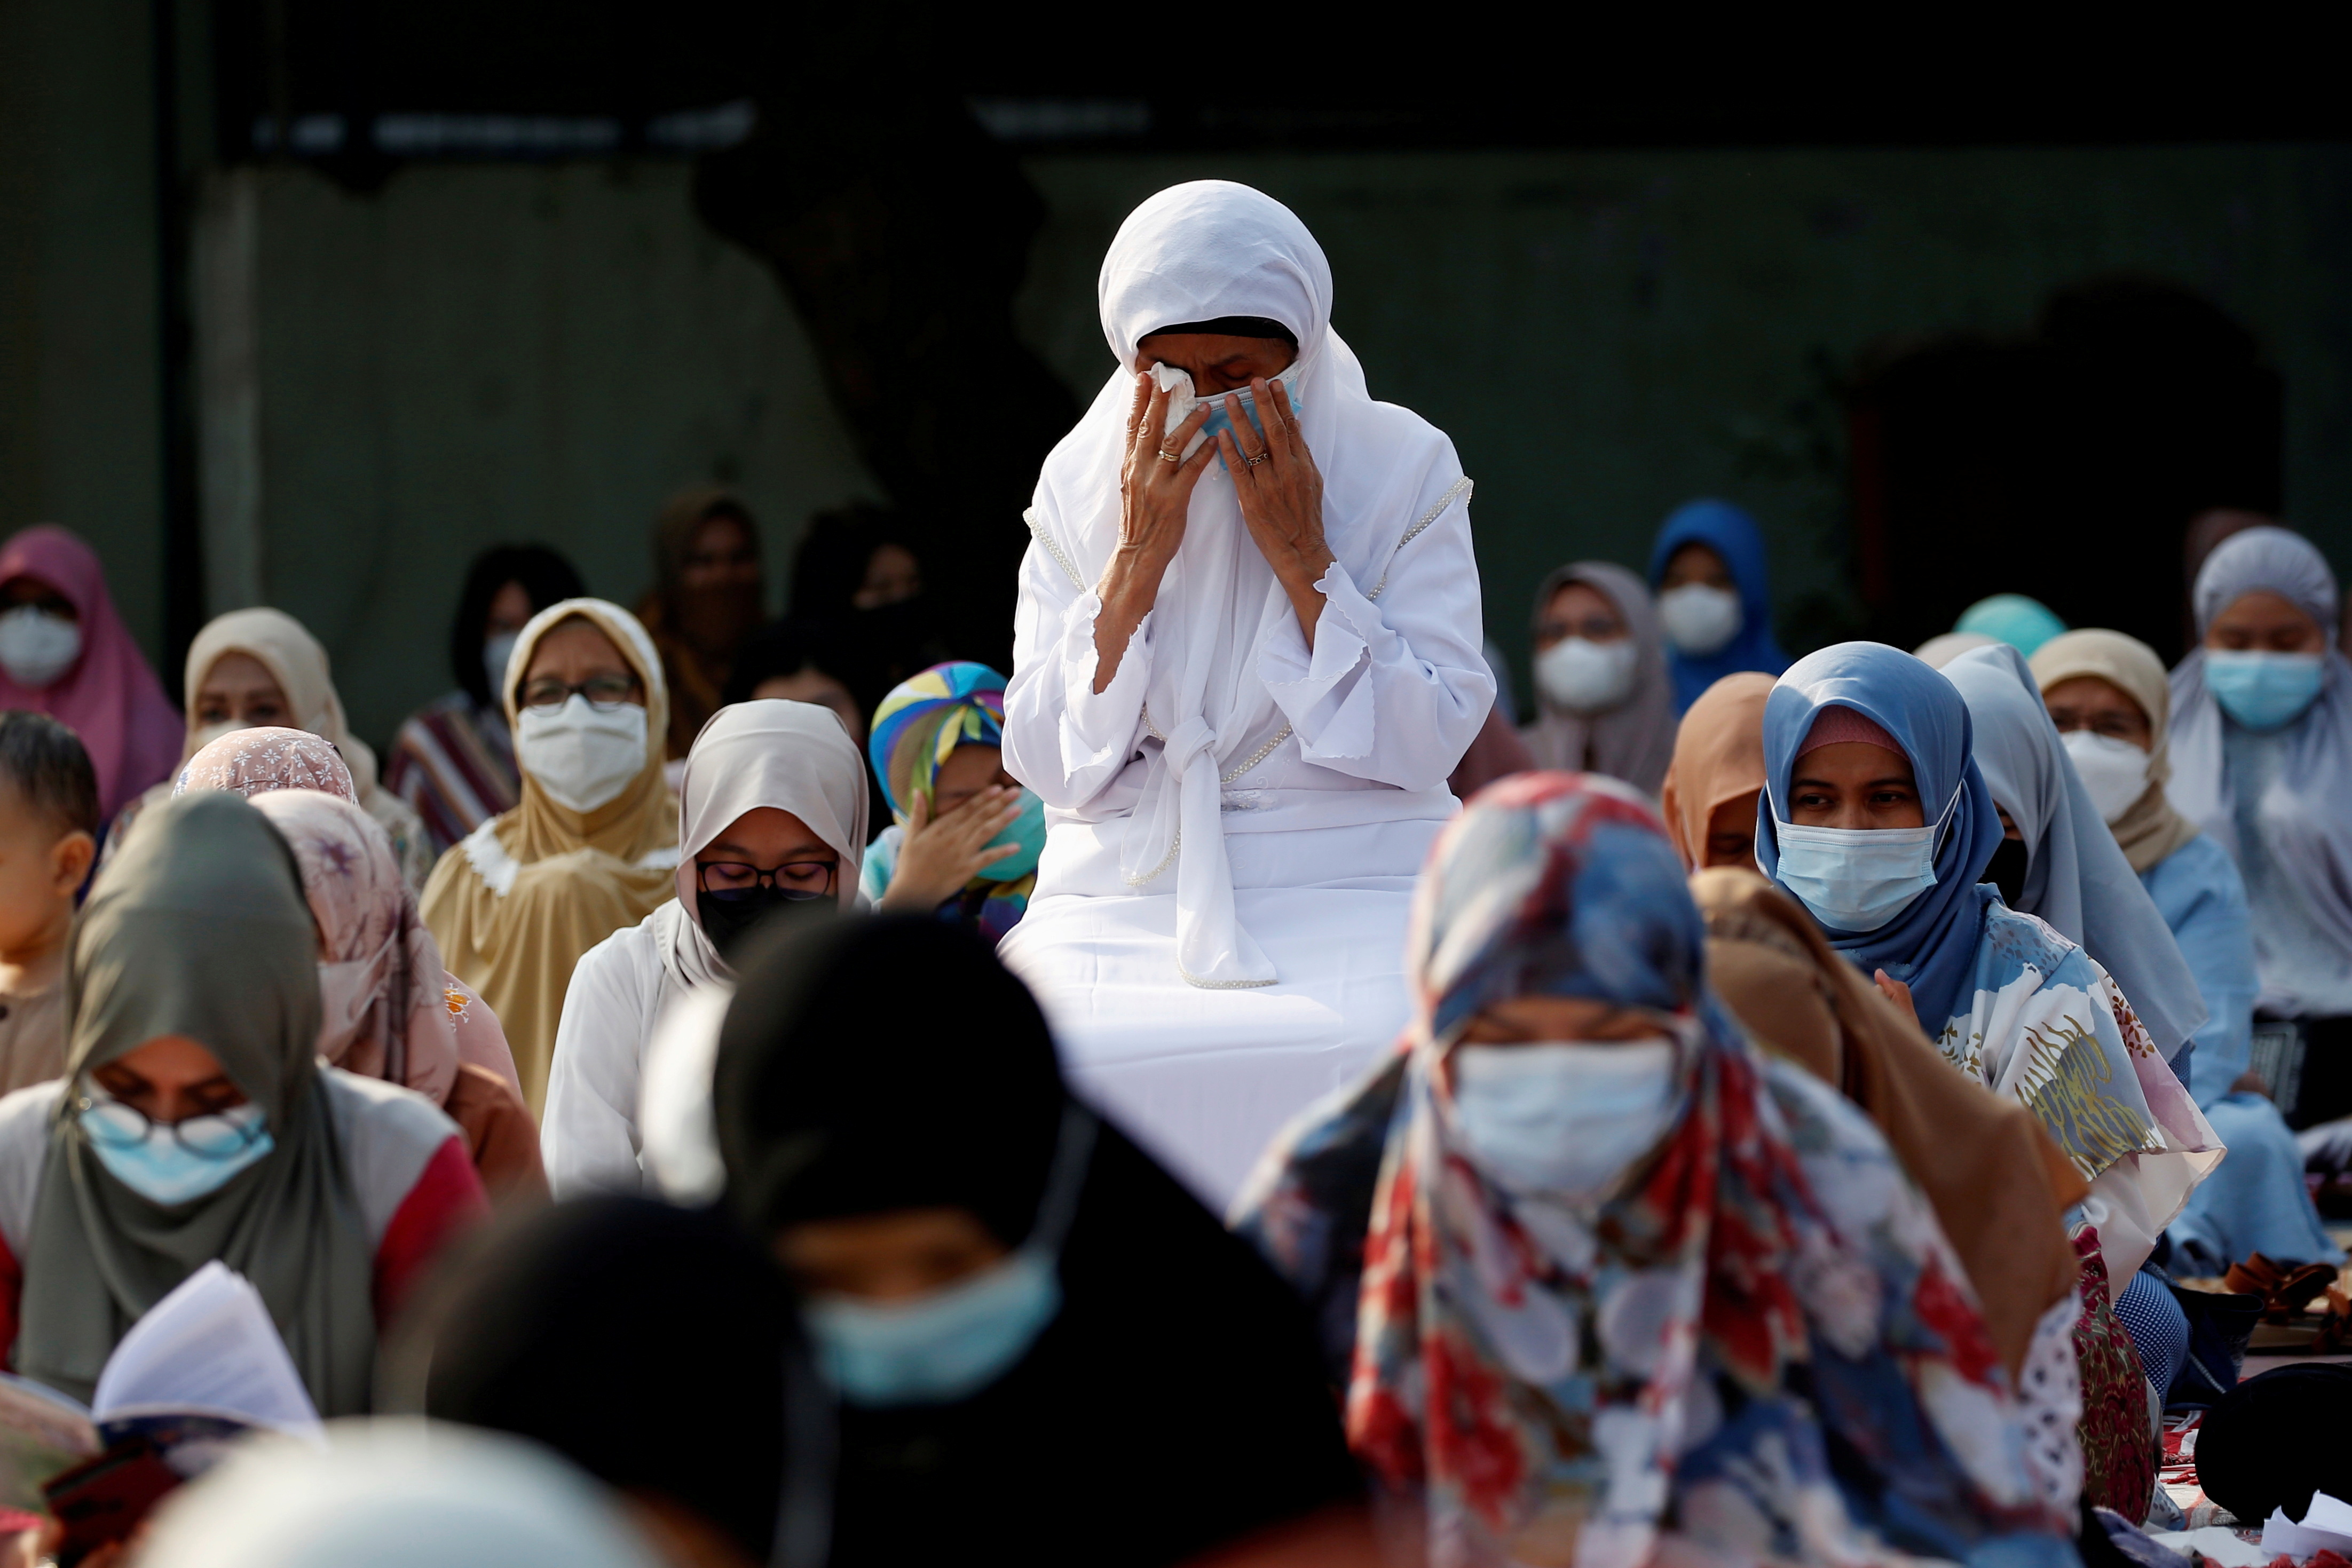 Indonesian Muslims pray at the Great Mosque of Al Azhar during Eid al-Fitr in Jakarta